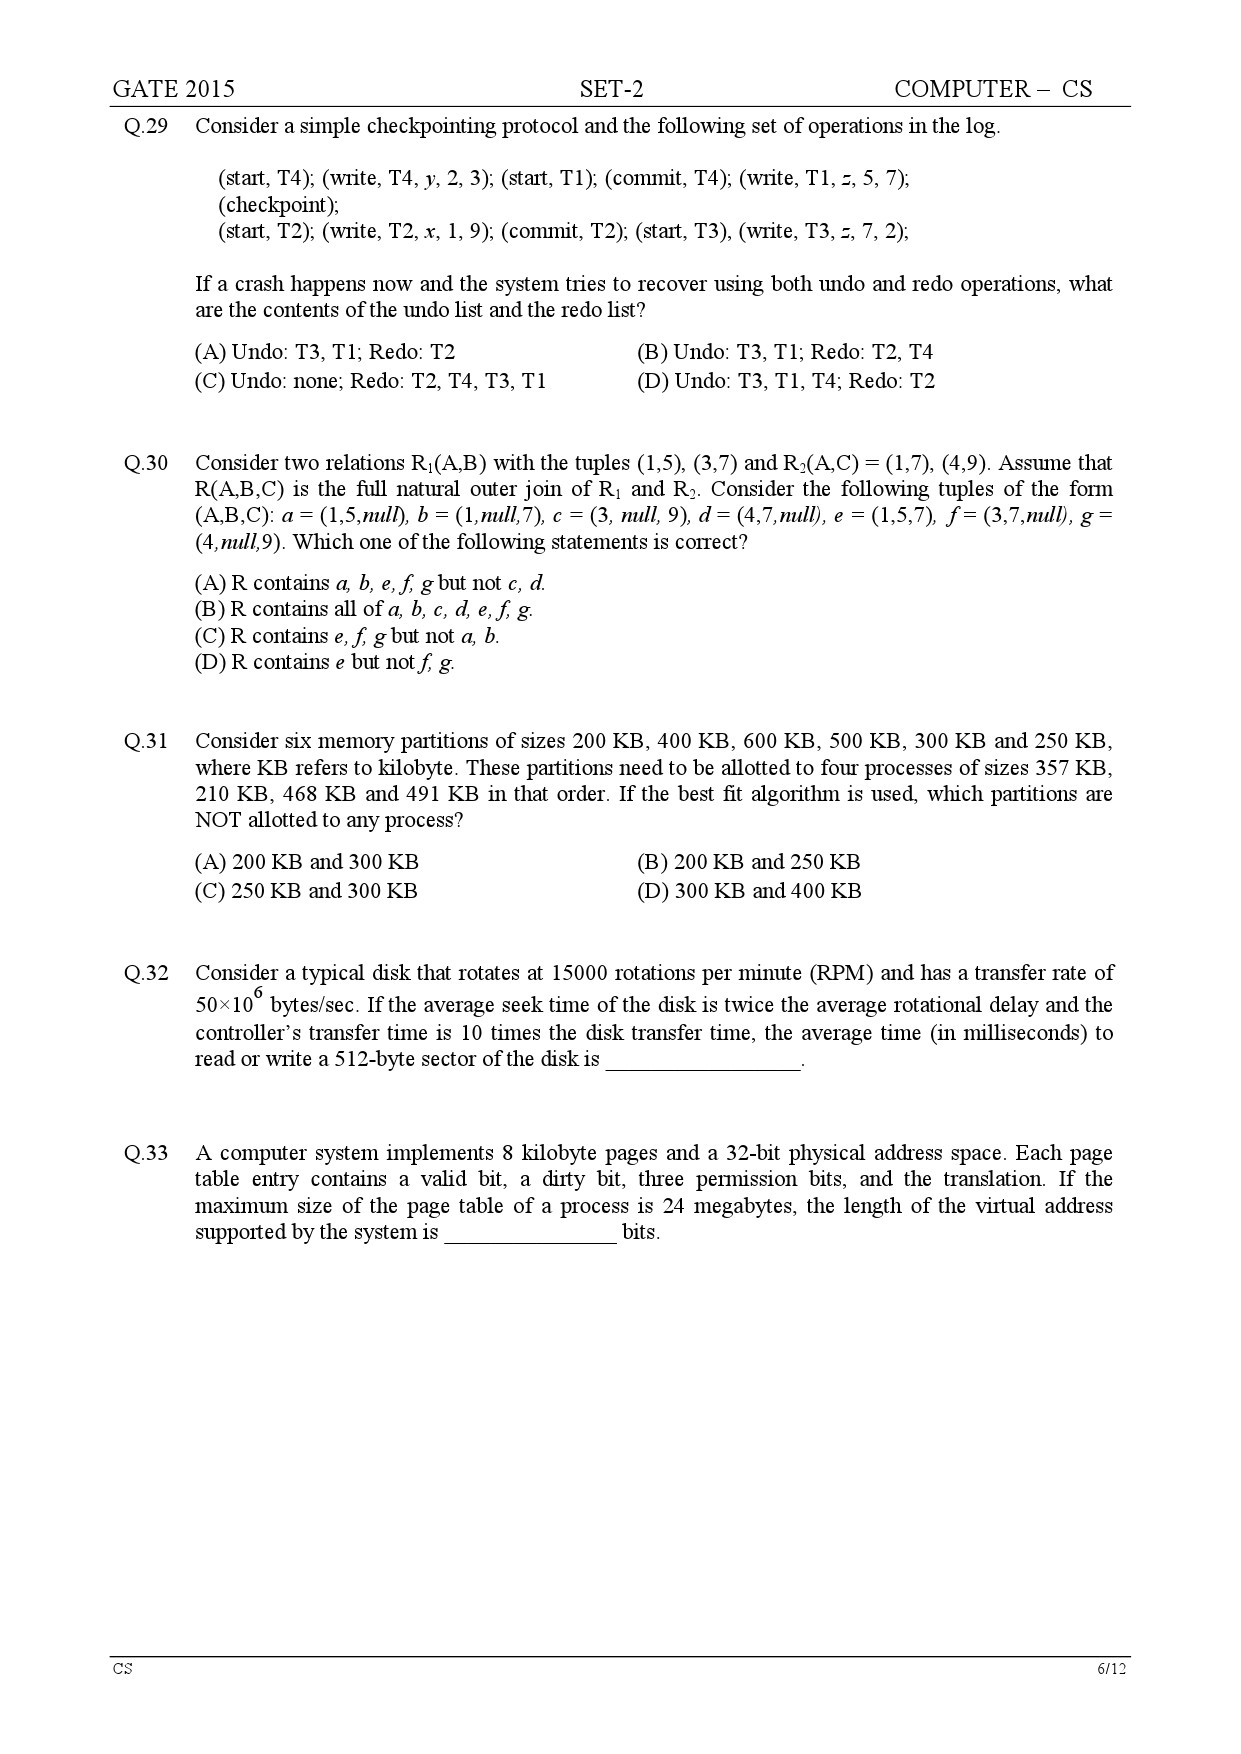 GATE Exam Question Paper 2015 Computer Science and Information Technology Set 2 6